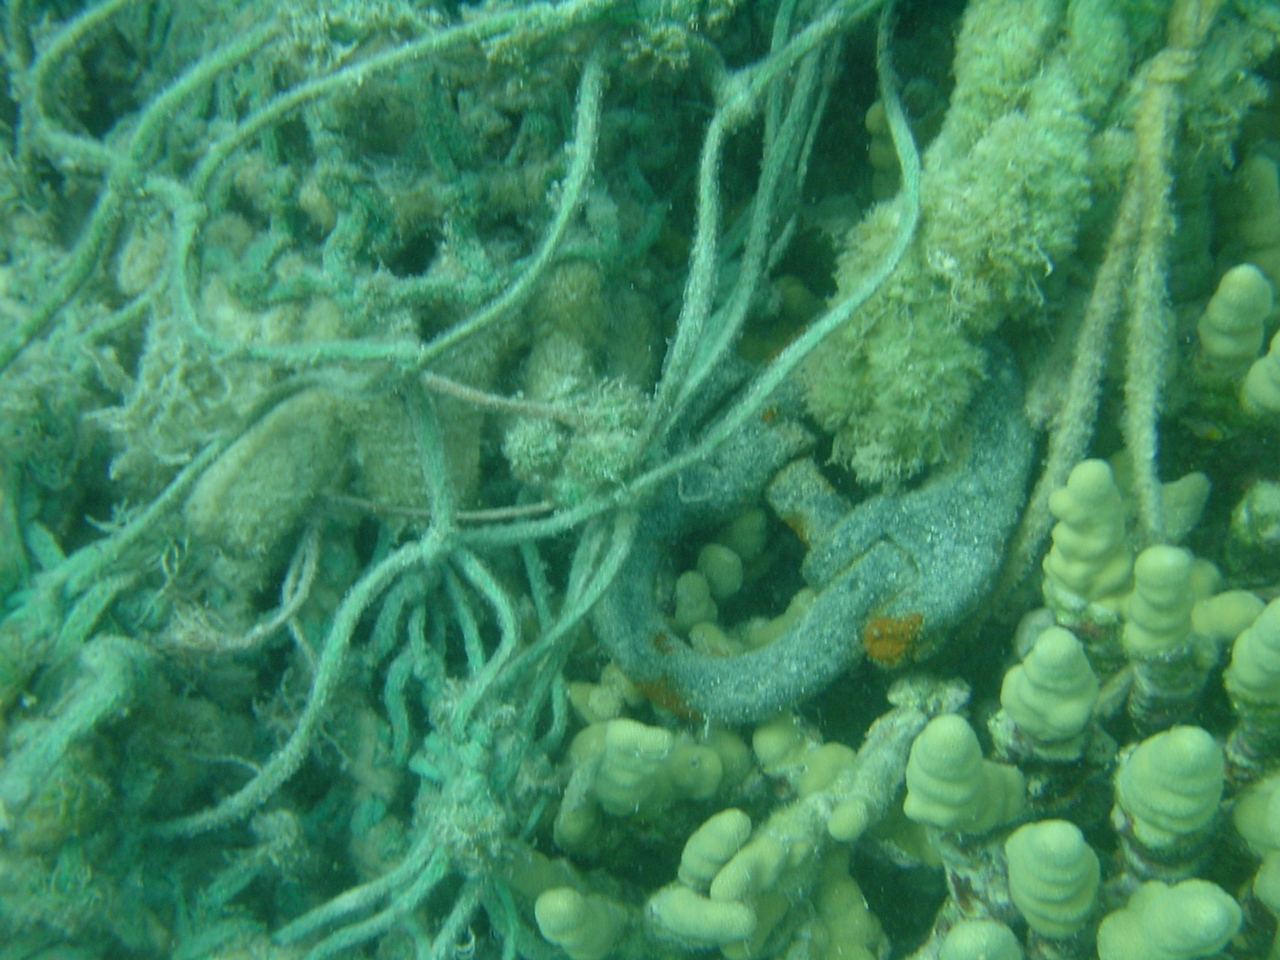 Derelict net entangled on reef with steel shackle that could cause reef damage